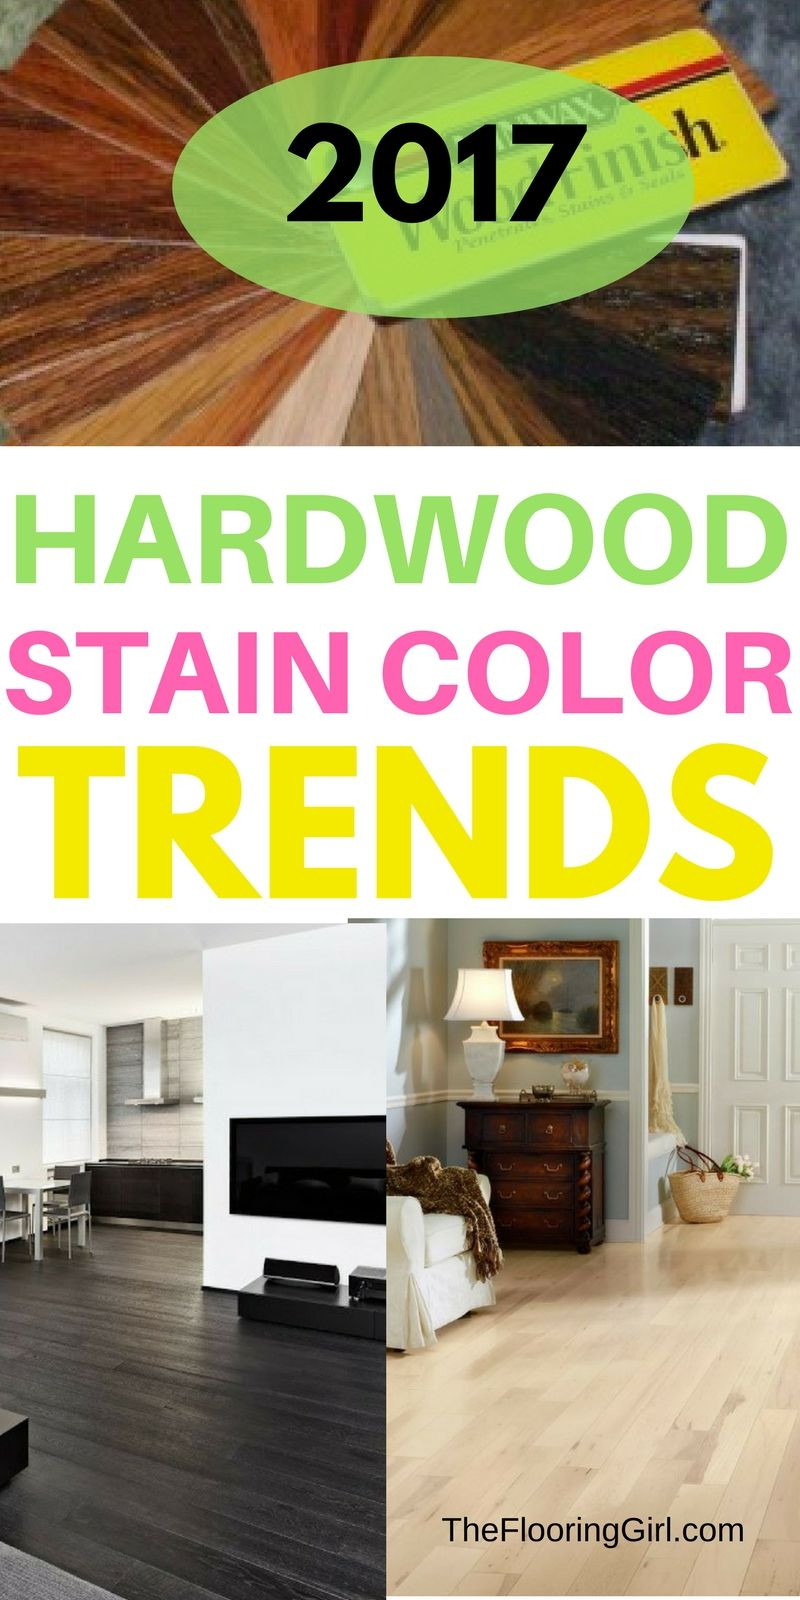 13 attractive Hardwood Floor Gouge Repair 2024 free download hardwood floor gouge repair of hardwood flooring stain color trends 2018 more from the flooring within hardwood flooring stain color trends for 2017 hardwood colors that are in style thefloo